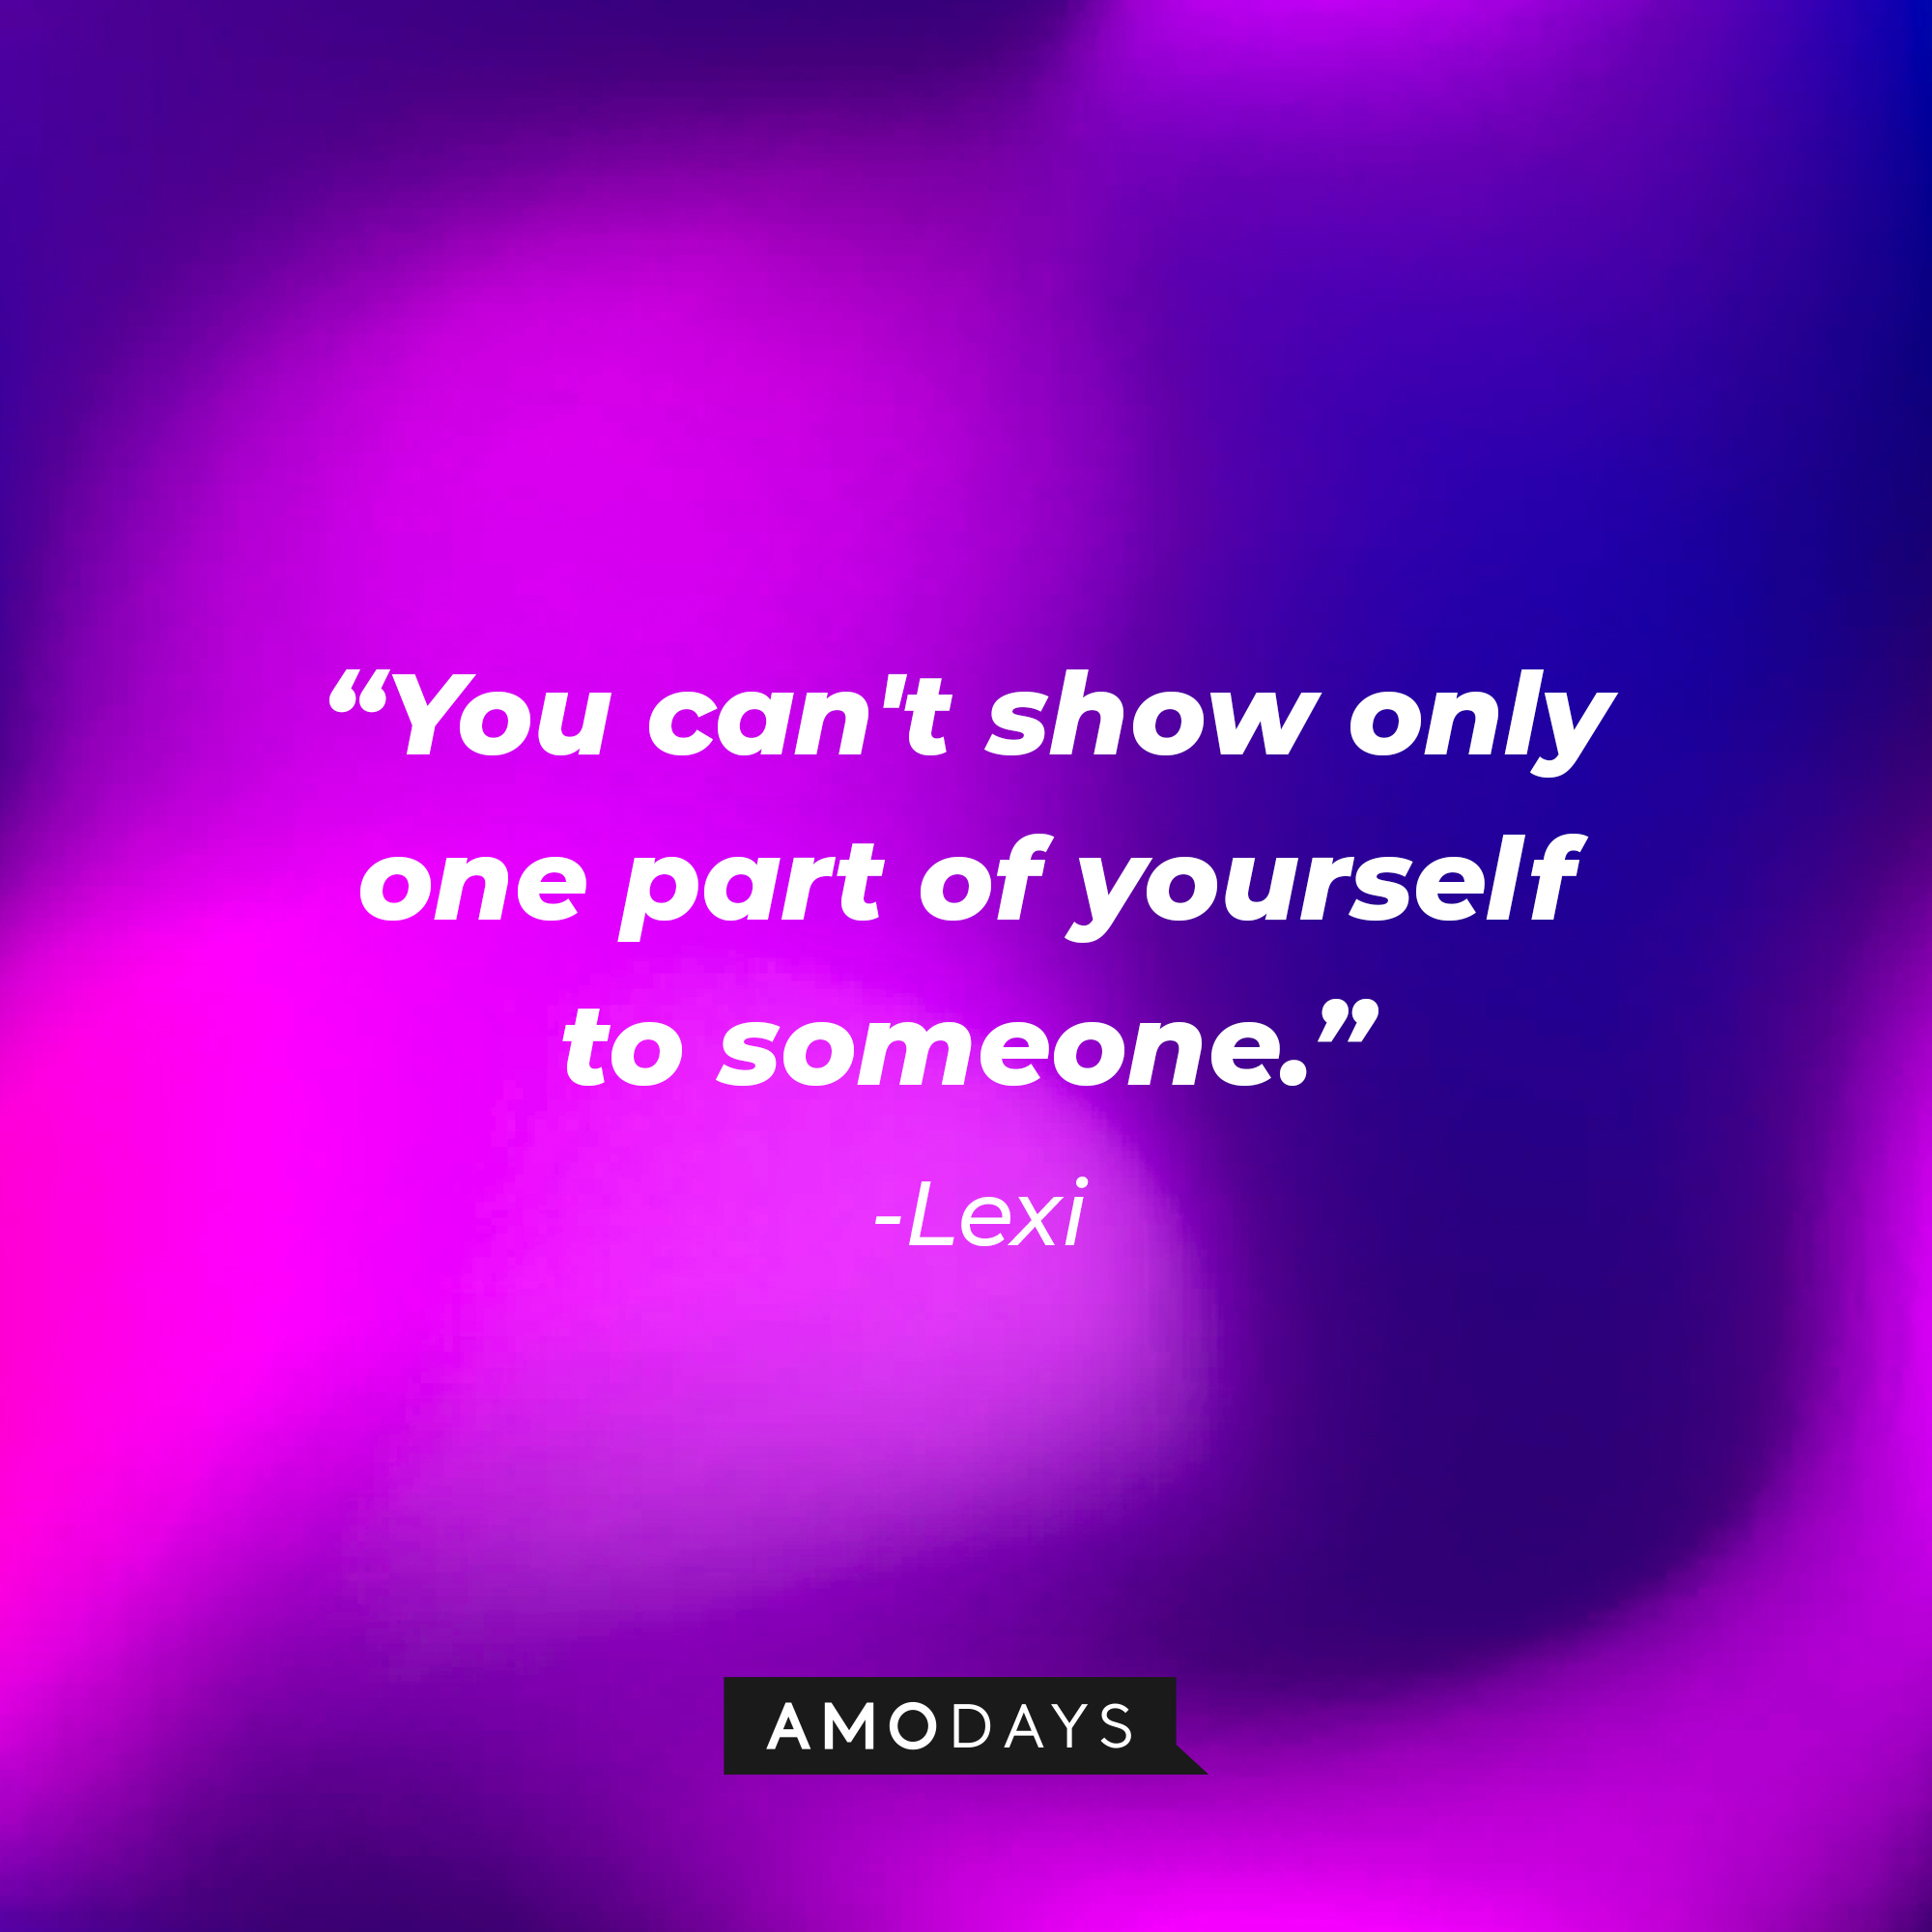 Lexi’s quote from ”Modern Love:  “You can't show only one part of yourself to someone.”  | Source: AmoDays